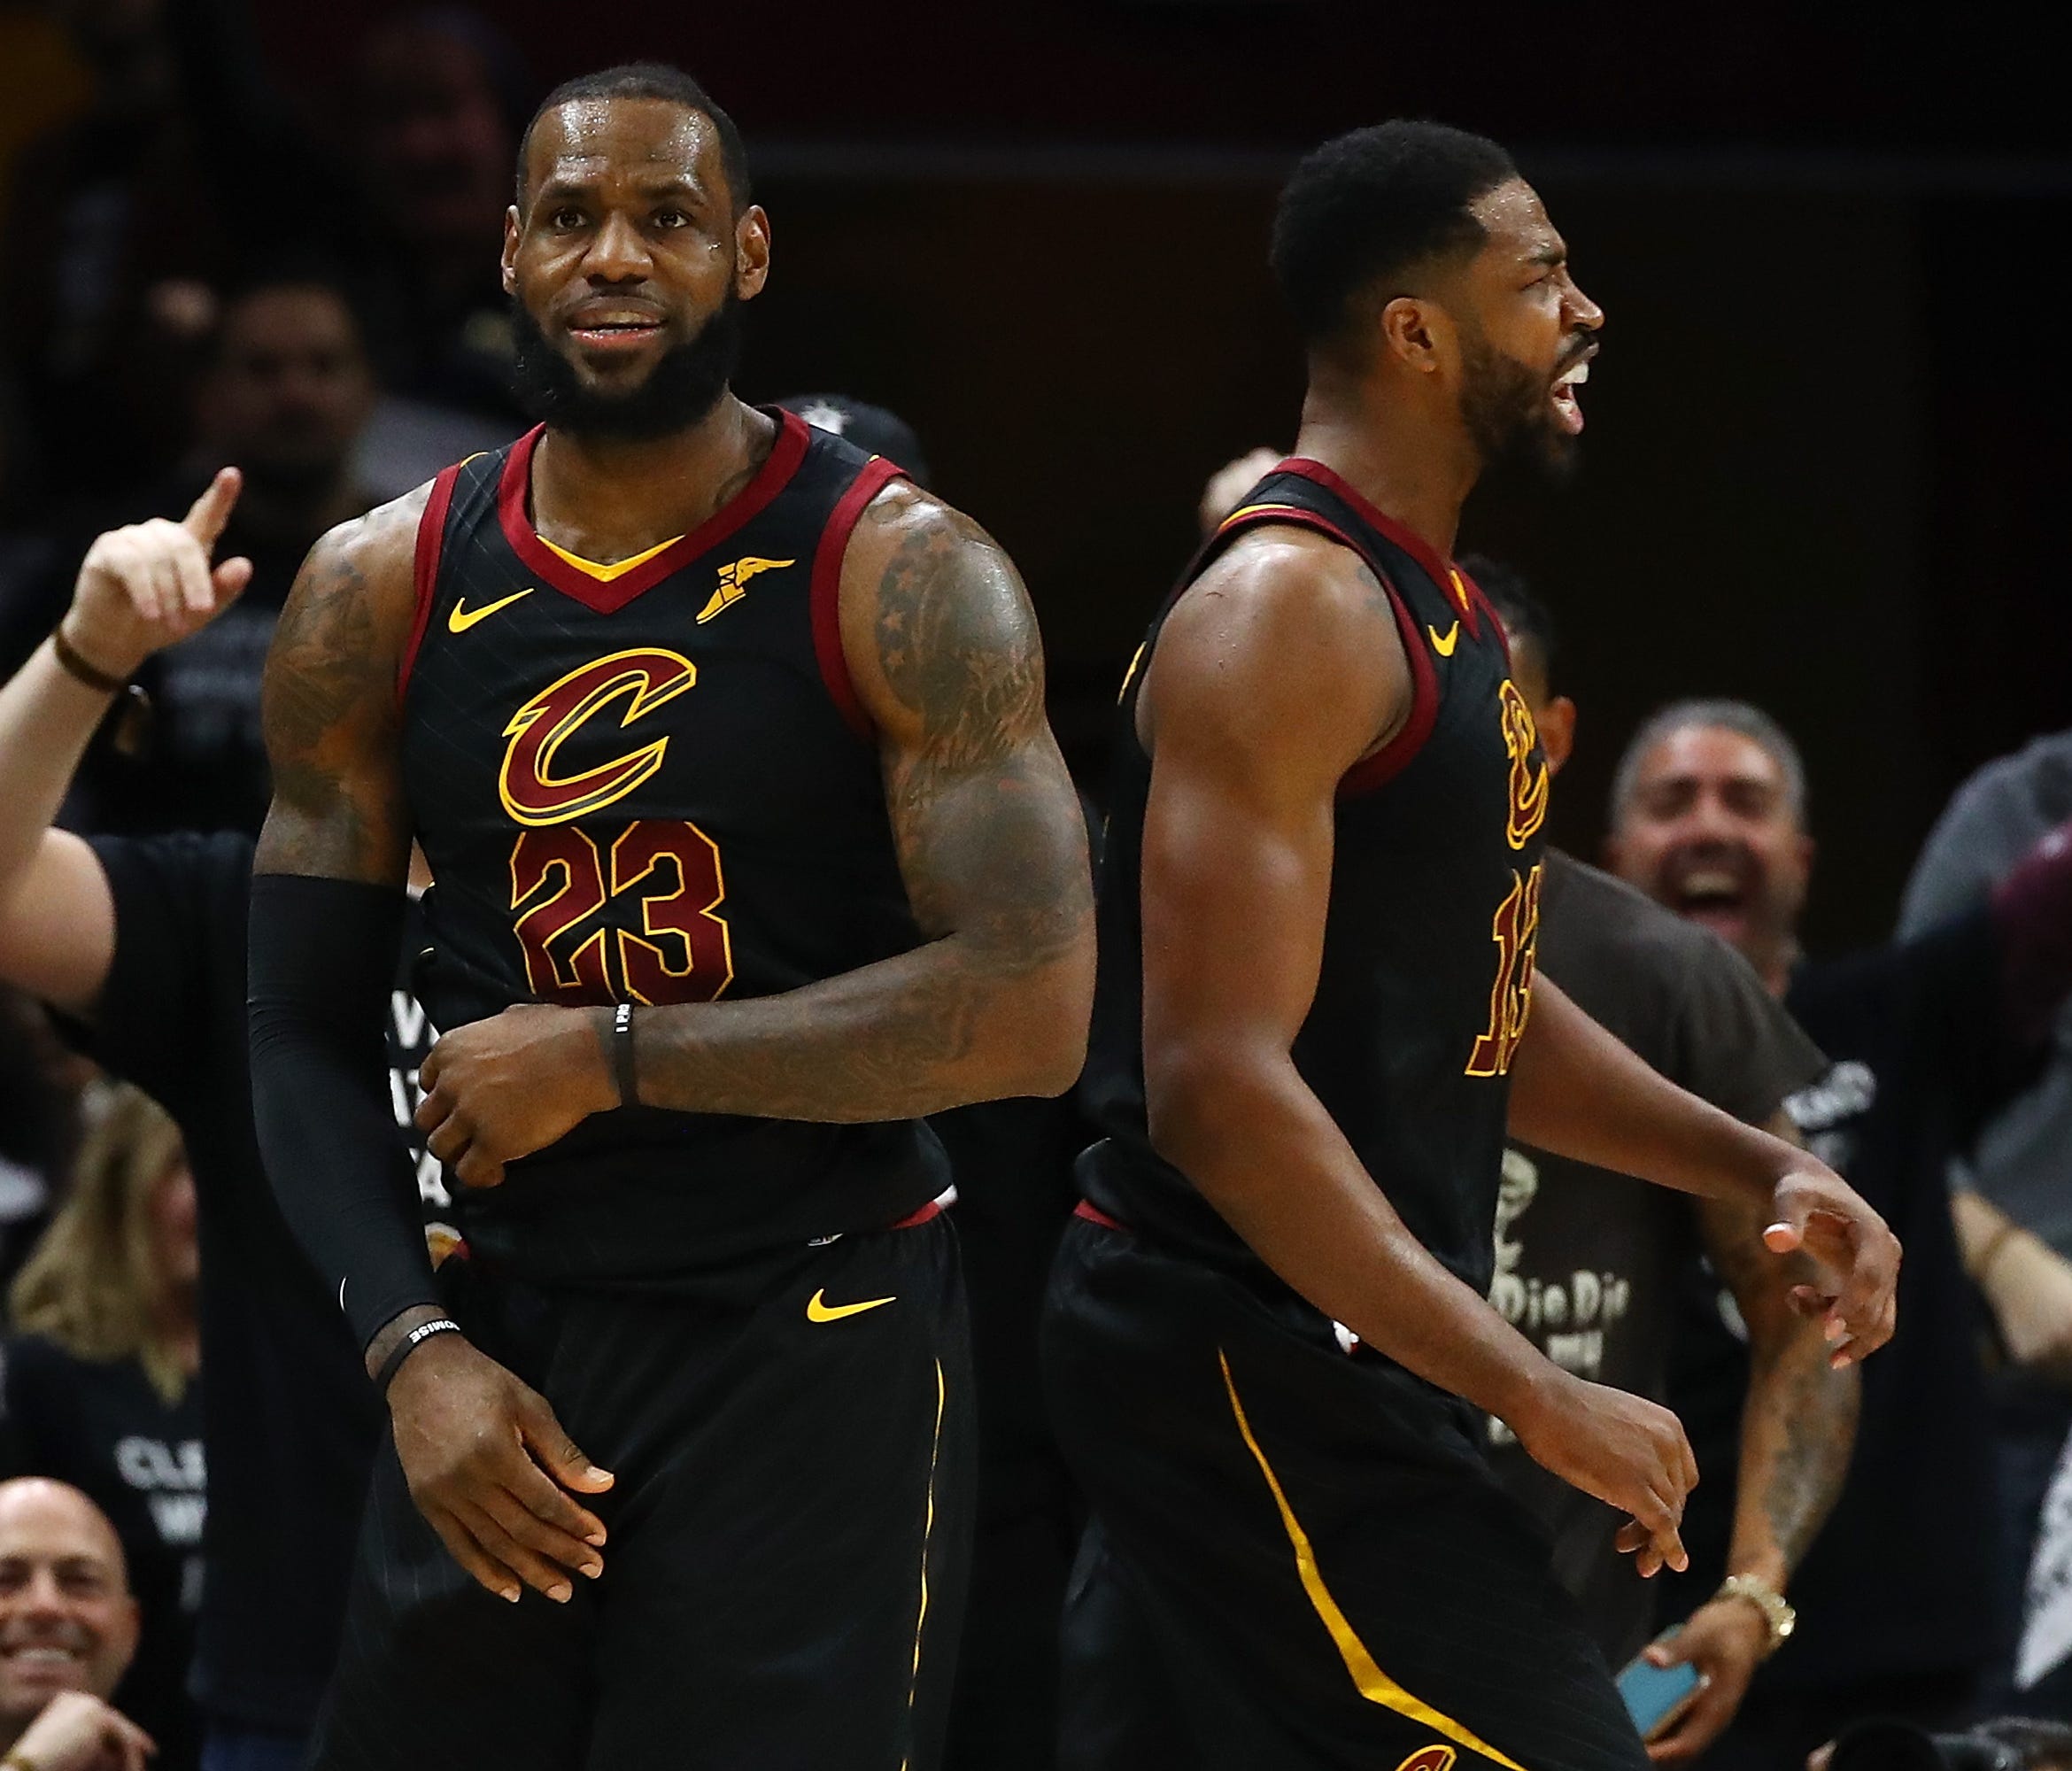 LeBron James #23 and Tristan Thompson #13 of the Cleveland Cavaliers react to a second half play while playing the Indiana Pacers in Game Seven of the Eastern Conference Quarterfinals during the 2018 NBA Playoffs at Quicken Loans Arena on April 29, 2